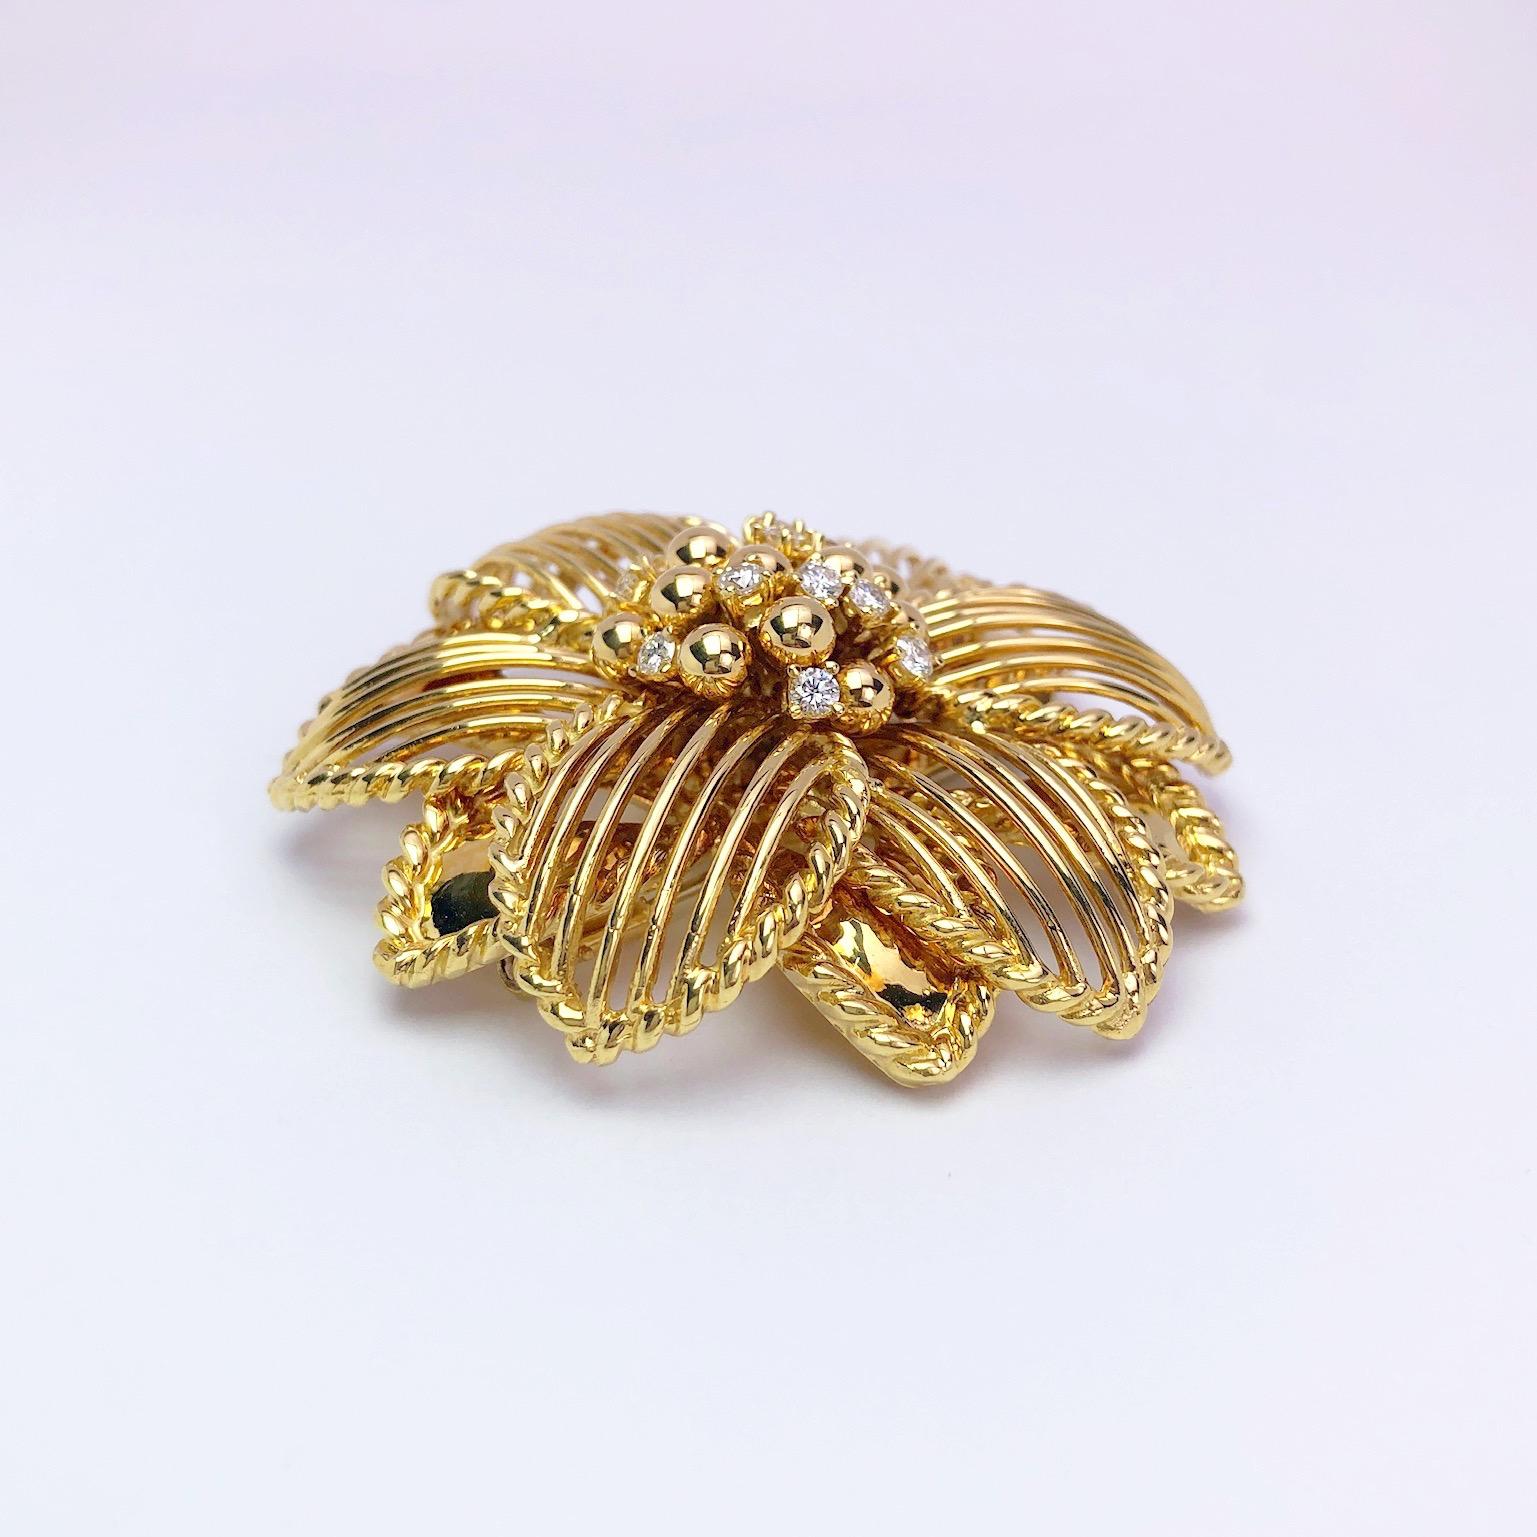 Started in the 1940's Sabbadini of Italy is known throughout the world for their artisinal excellence and creative design.
This 18 karat yellow gold flower brooch is set with 0.95 carats of round brilliant diamonds. The flower measures 2.25